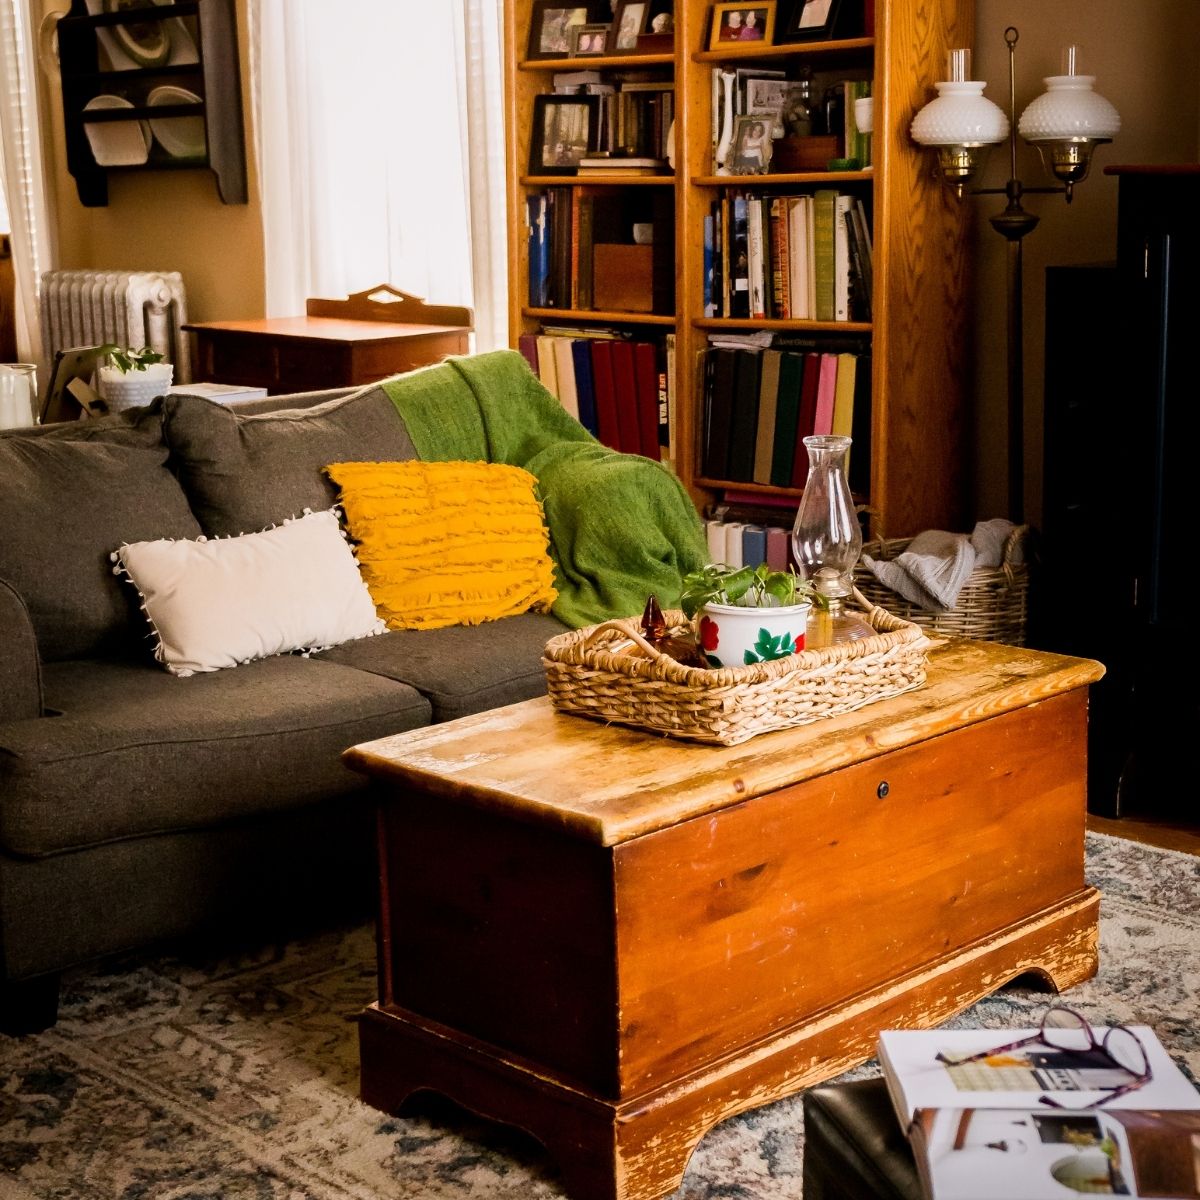 Simple Ways to Make Your Home Feel Cozy